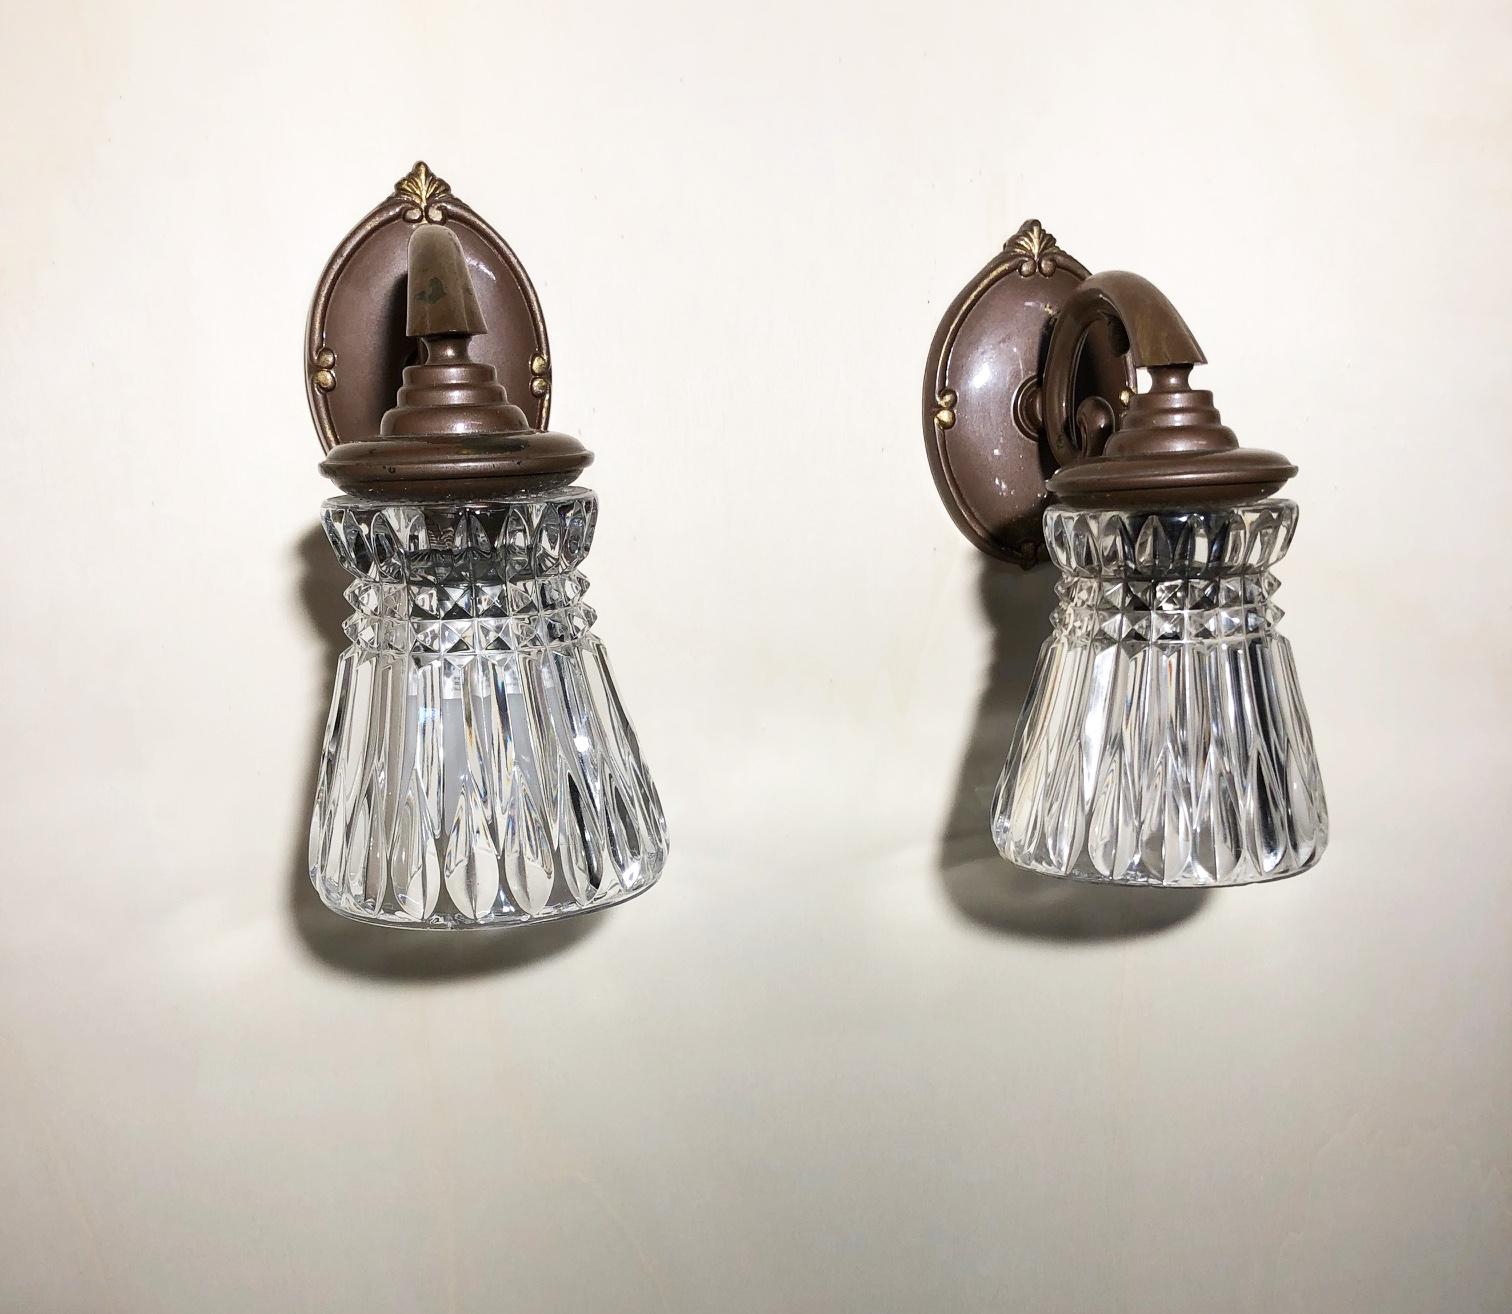 Pair of Original 1970s Italian Brass Wall Lamps, Bronzed Color 9